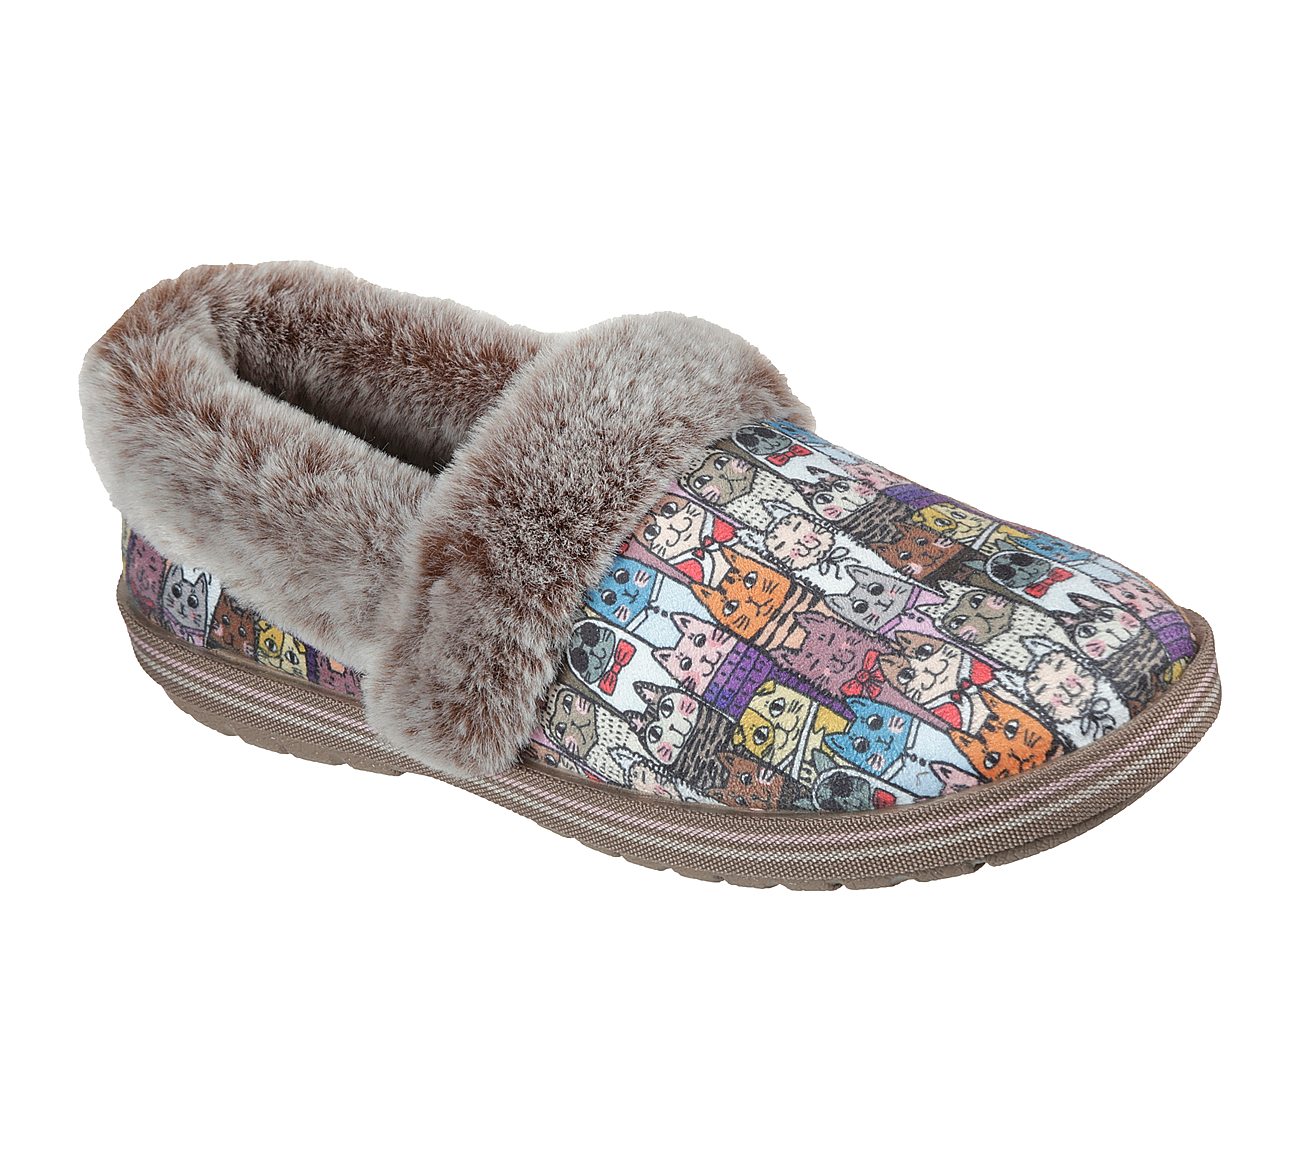 skechers bobs slippers canada